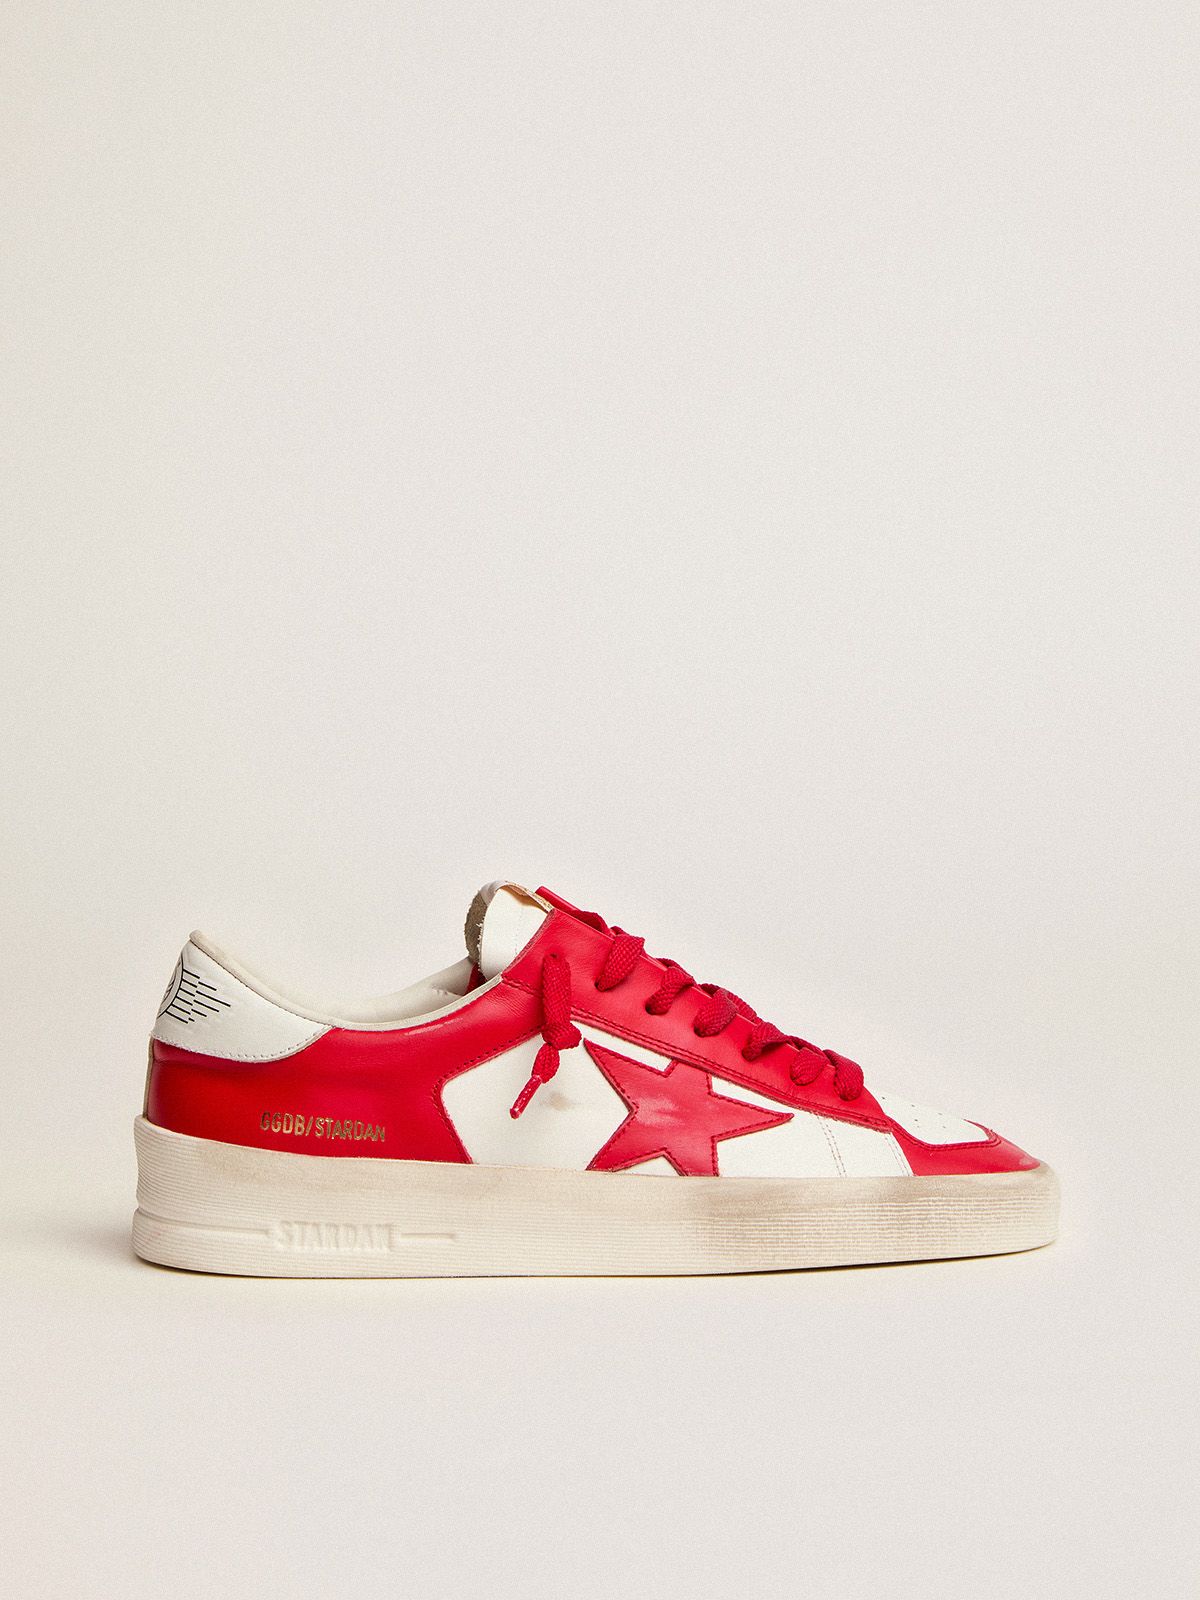 Stardan sneakers in white and red leather | 